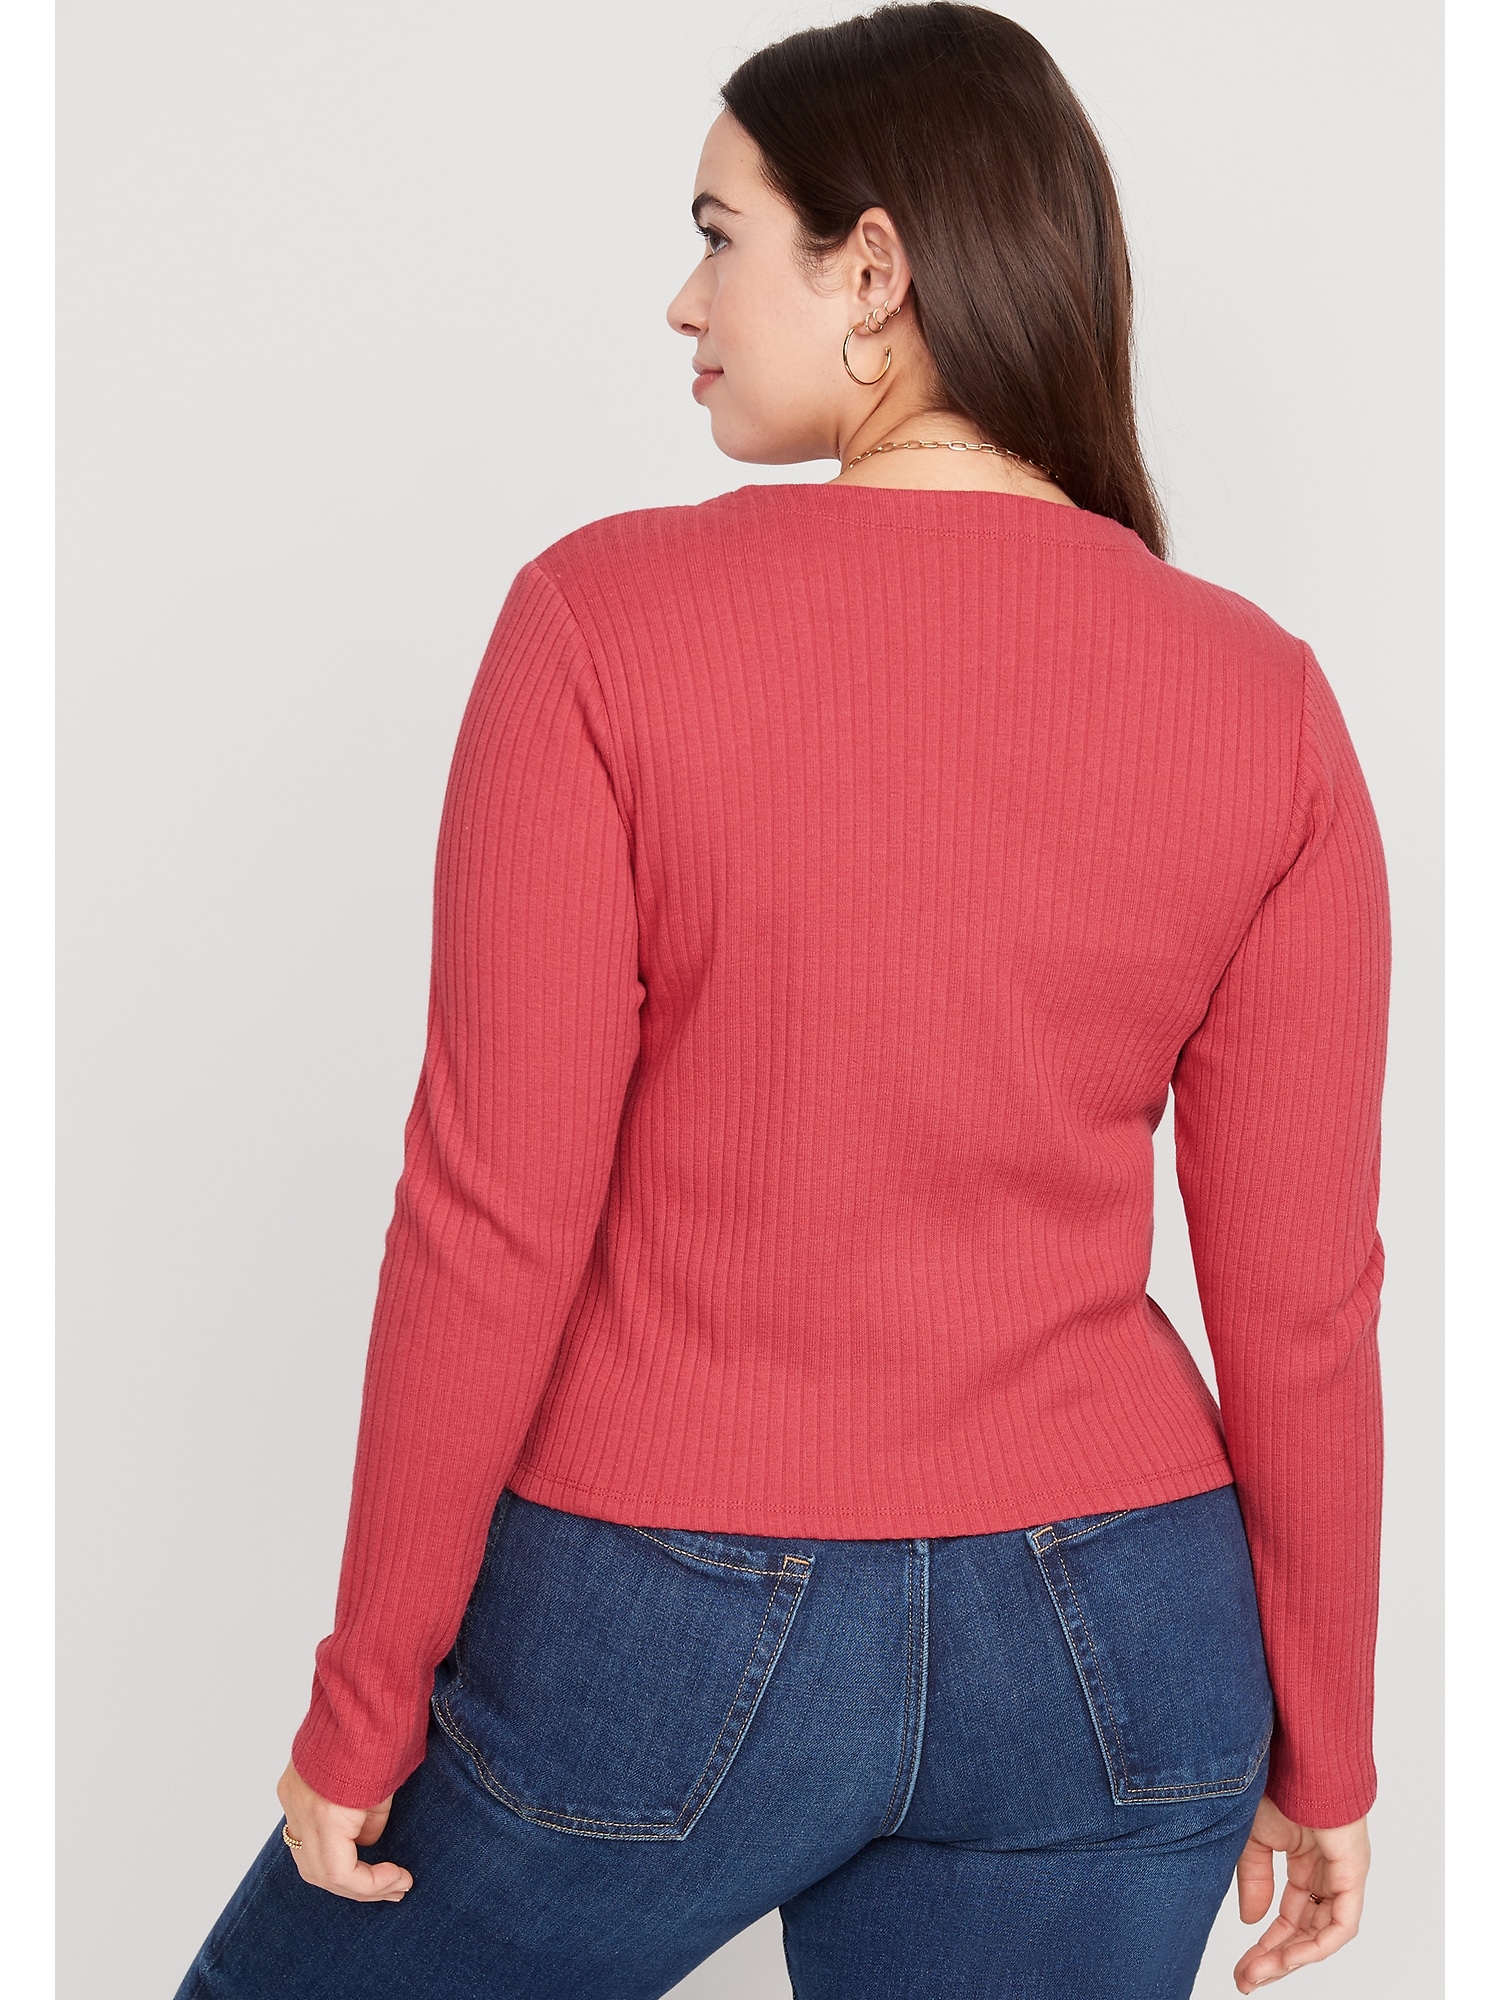 Rib-Knit Matching Single-Button Cardigan Sweater for Women | Old Navy